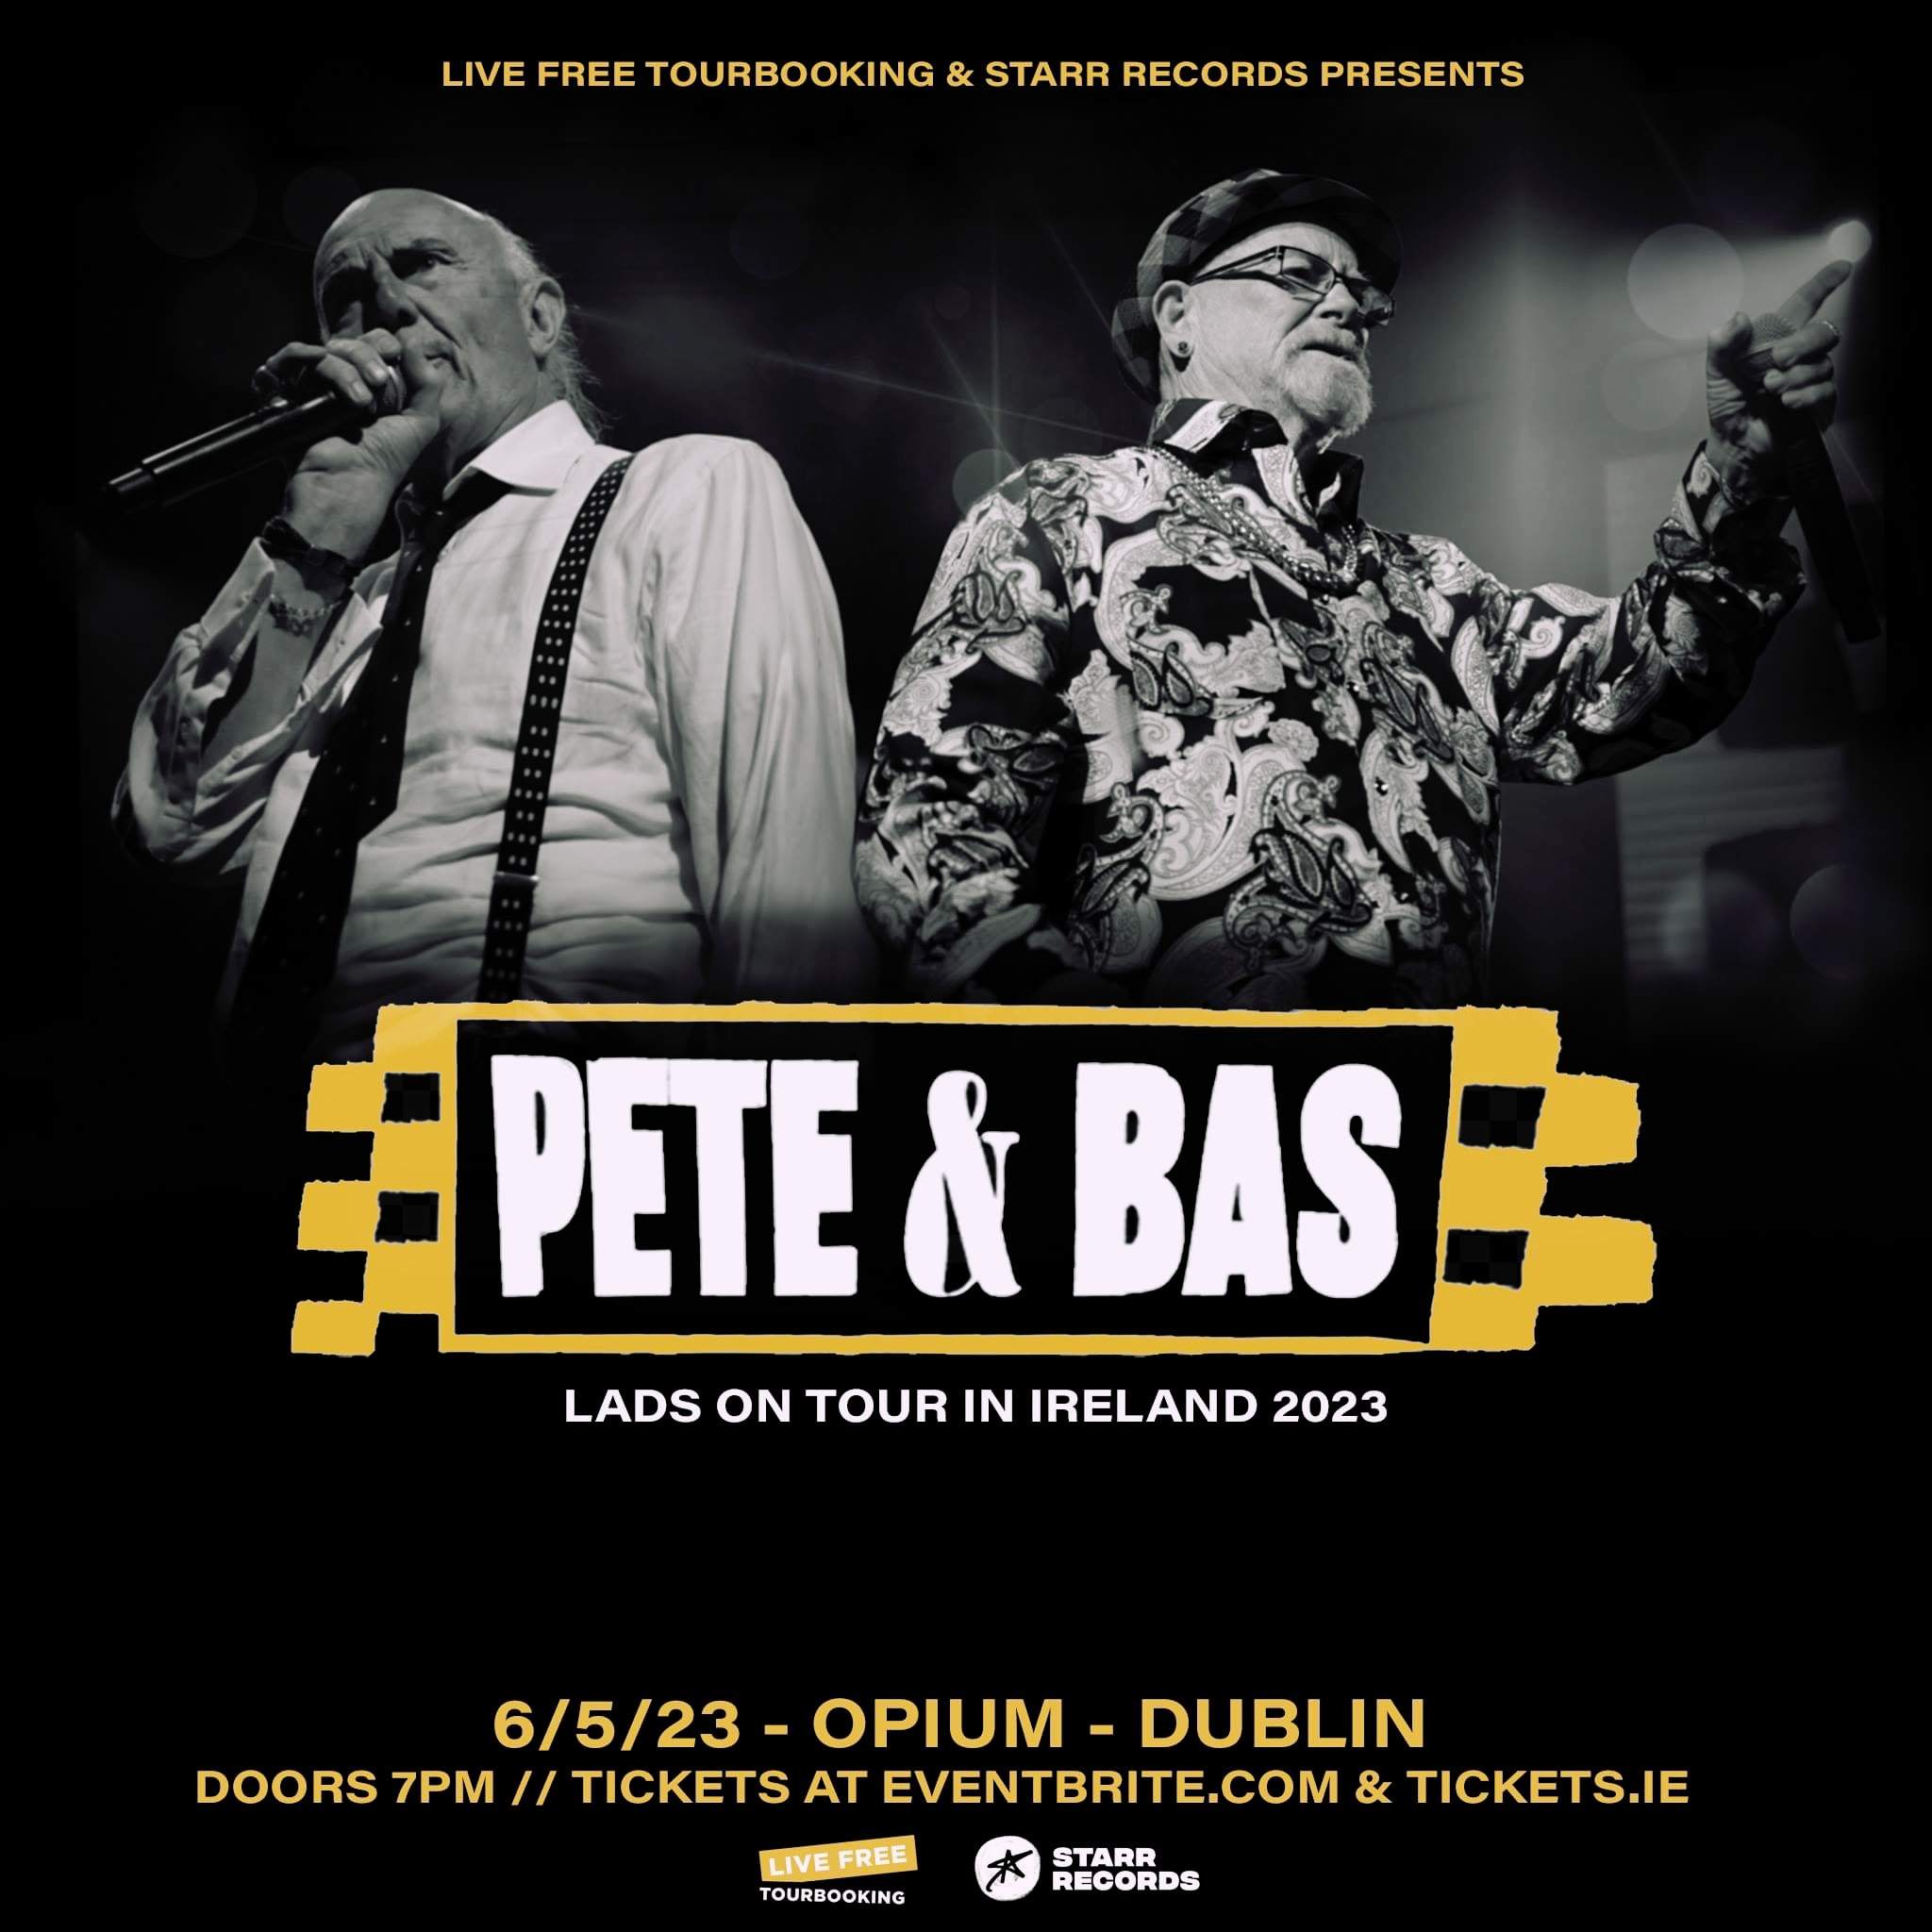 Pete and Bas - Lads on Tour in Ireland - フライヤー表